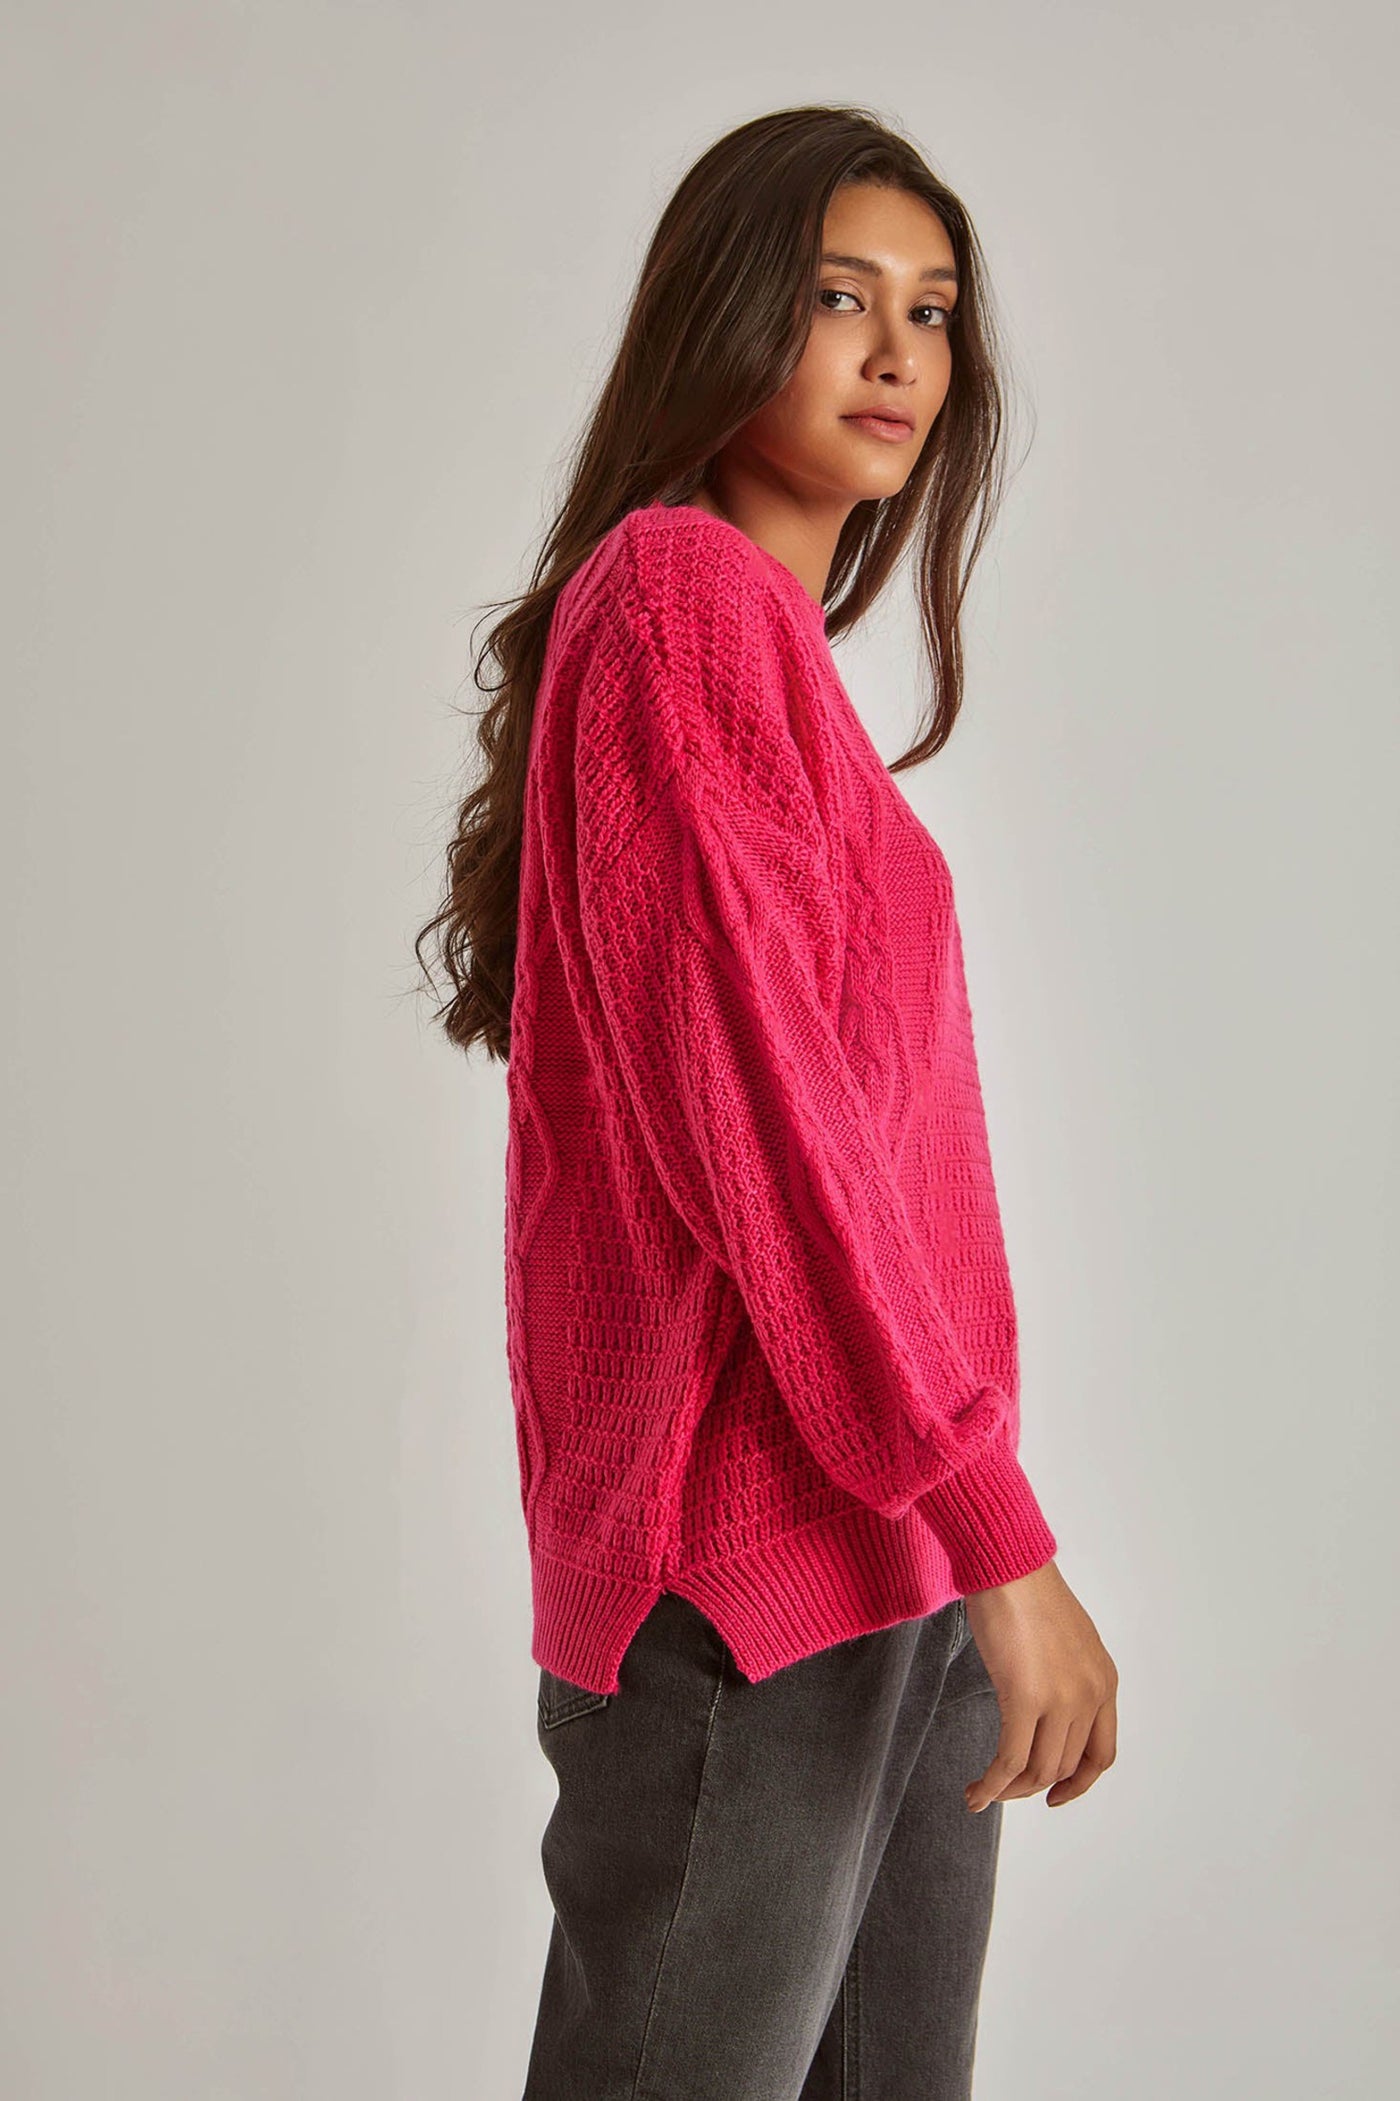 Pullover - Fashionable - Comfy